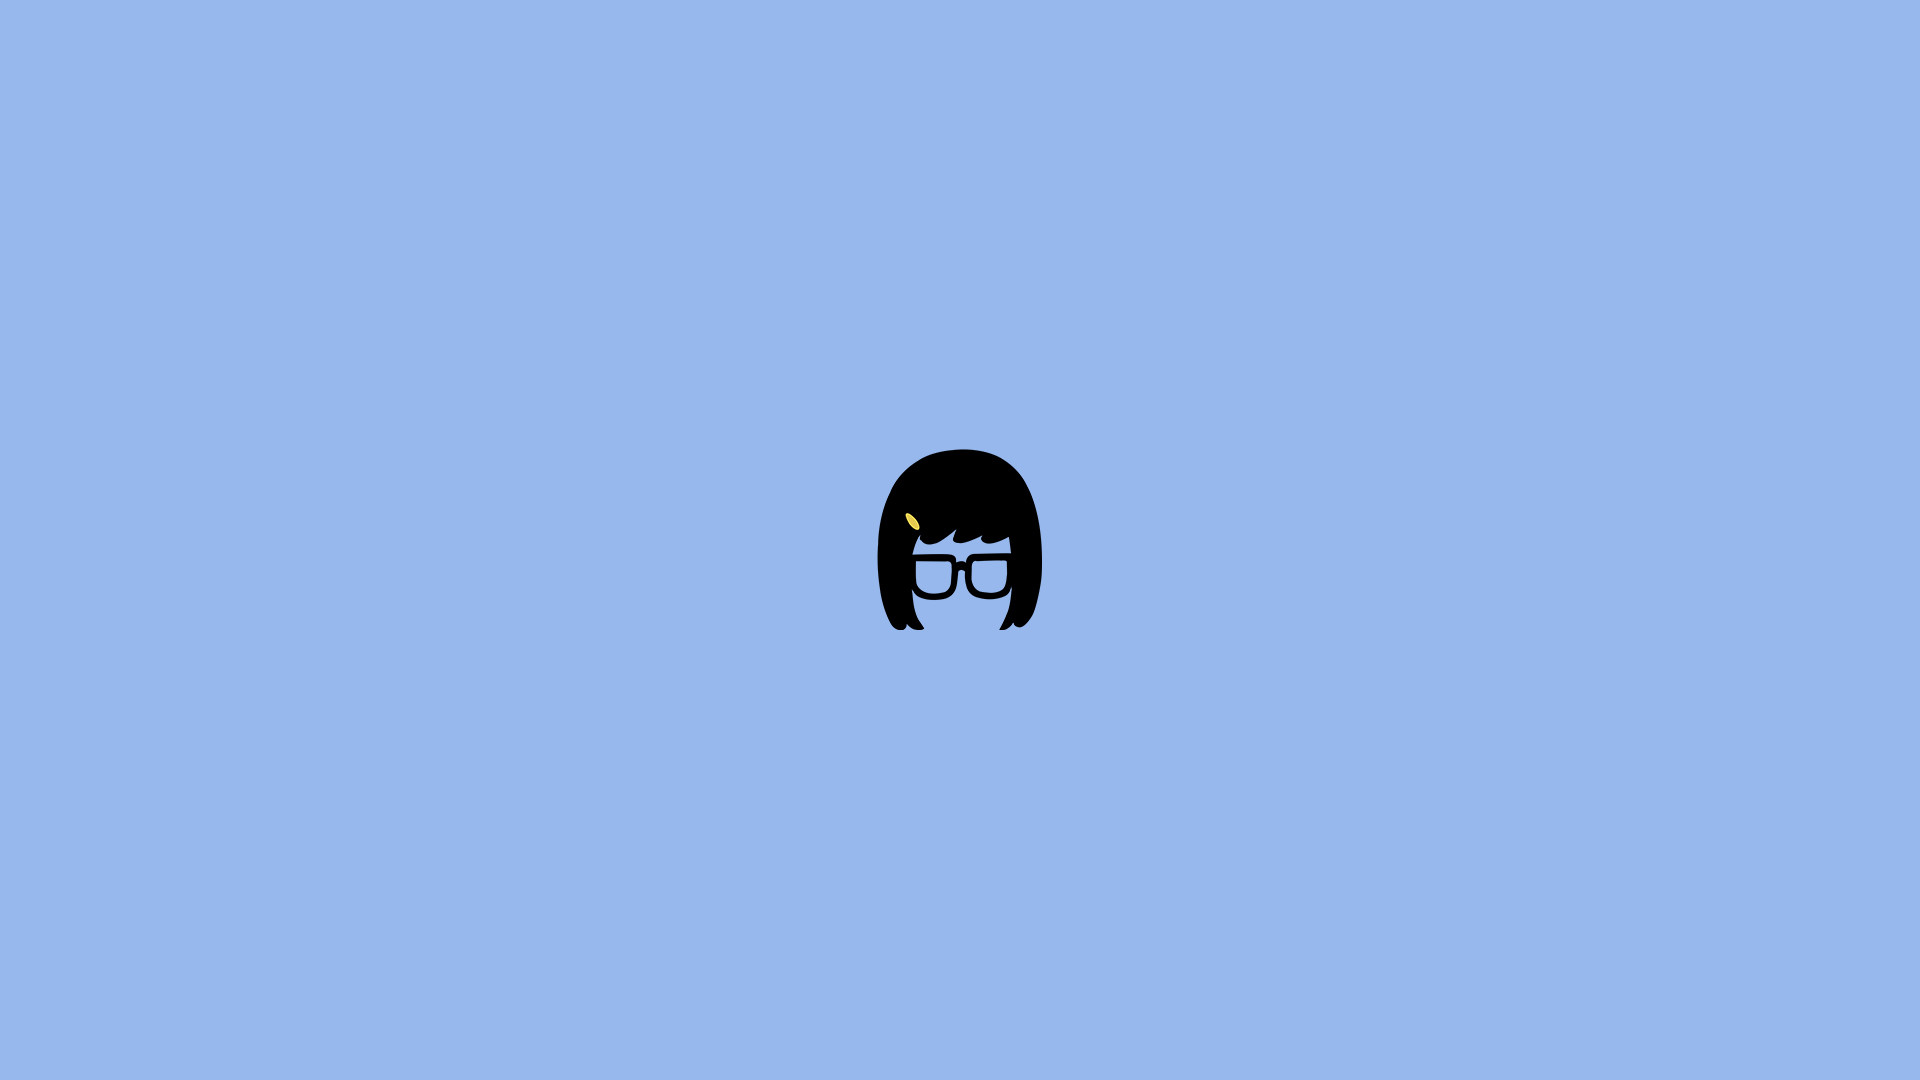 Tina. I couldn't find any Bob's Burgers wallpapers …